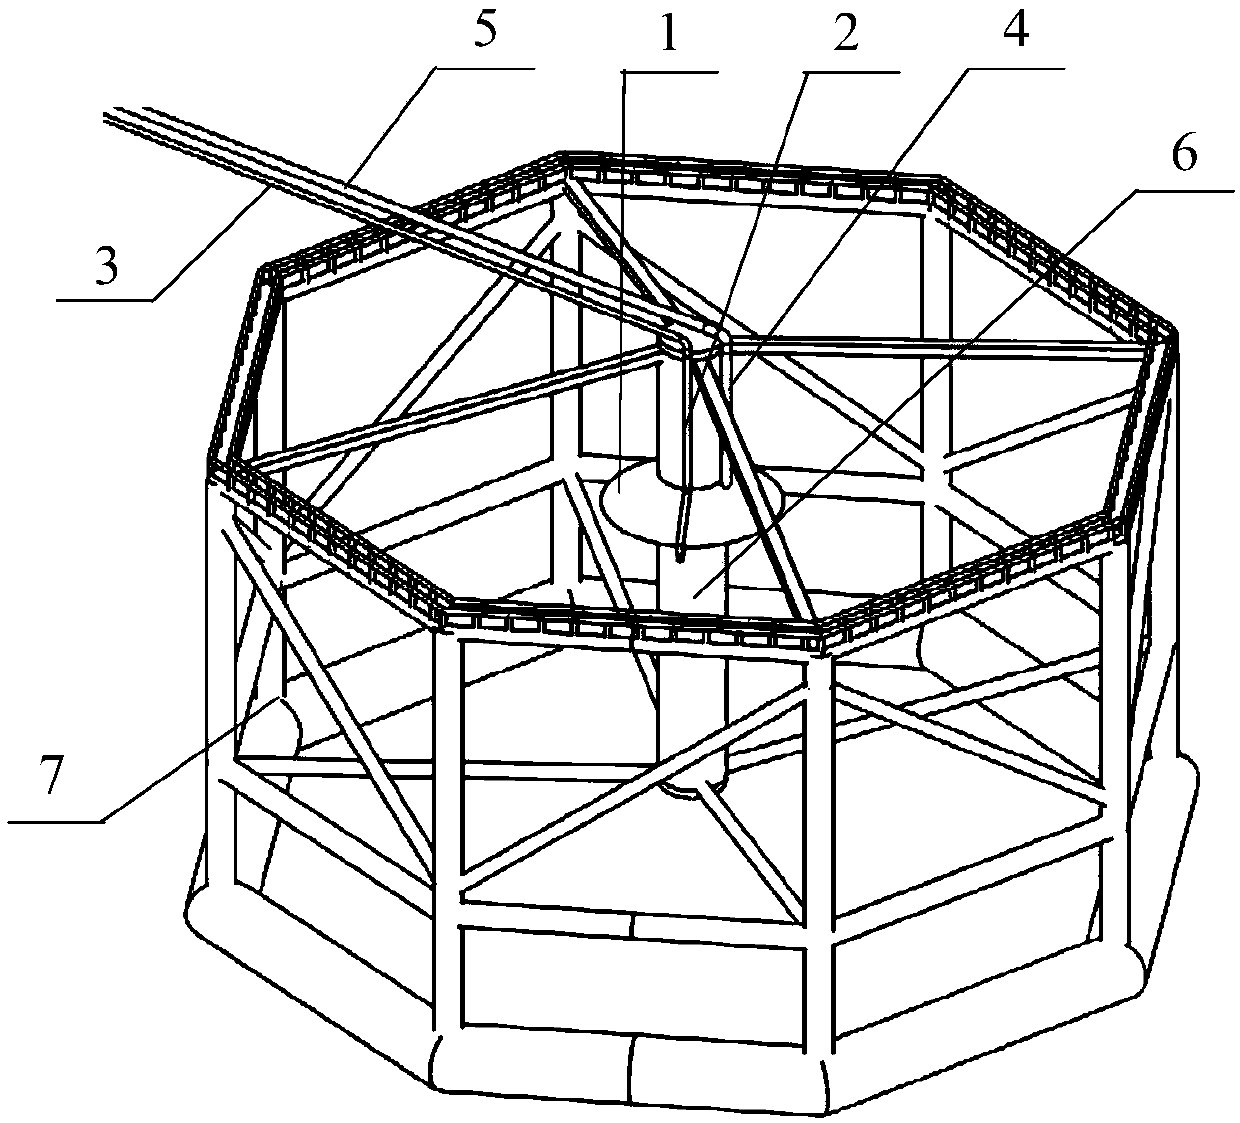 Air supplement device used for settleable fish-culturing net cage